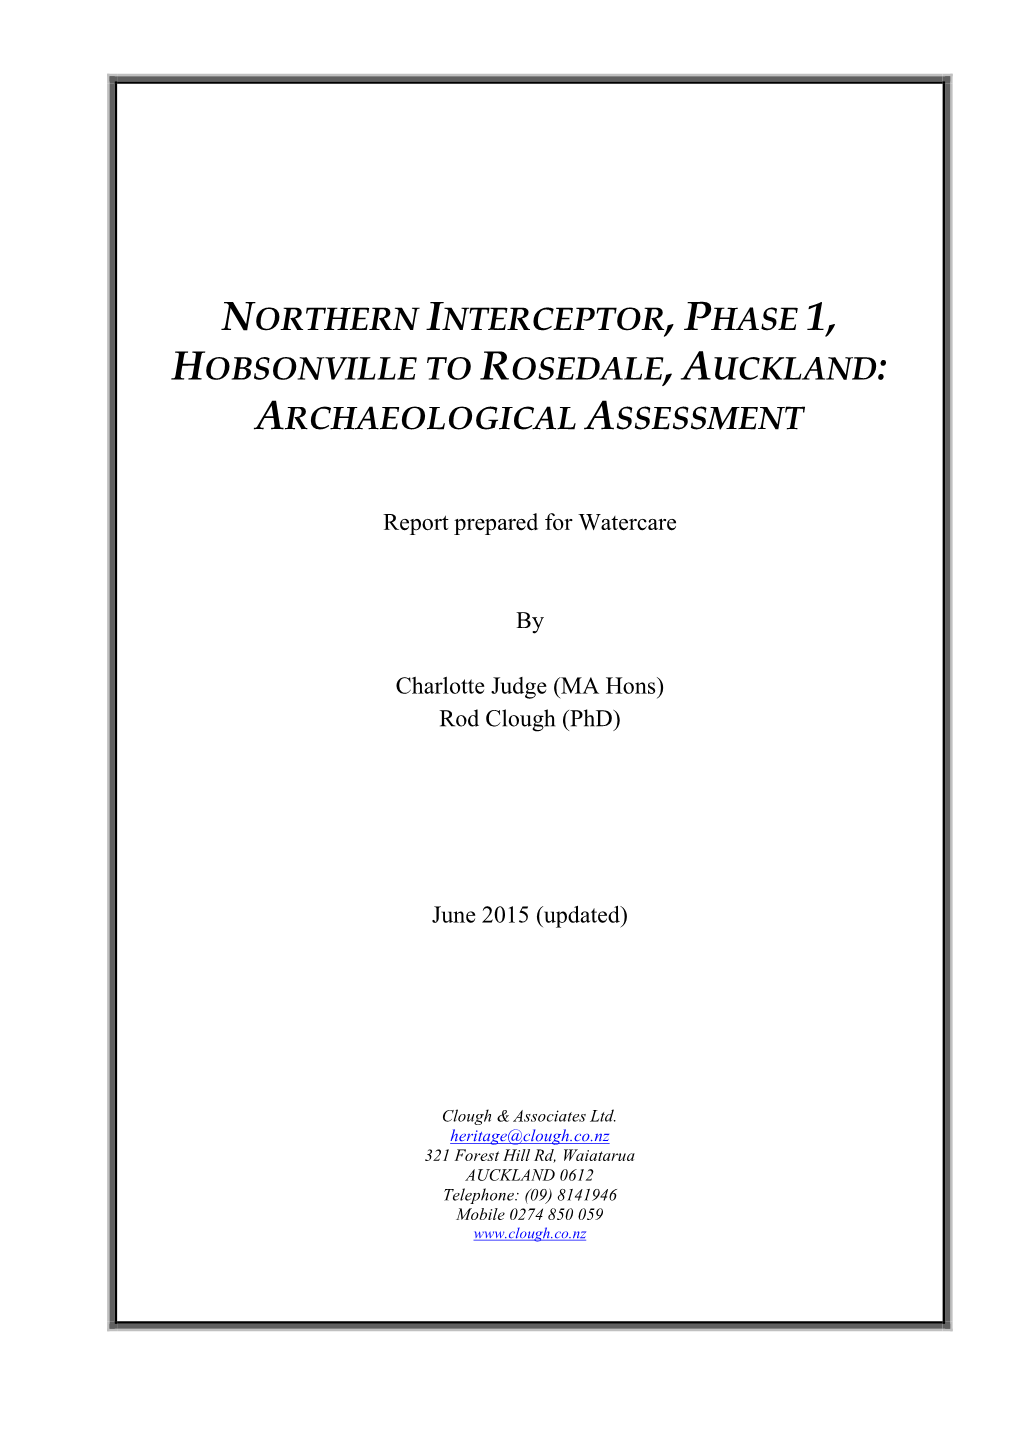 Northern Interceptor, Phase 1, Hobsonville to Rosedale, Auckland: Archaeological Assessment